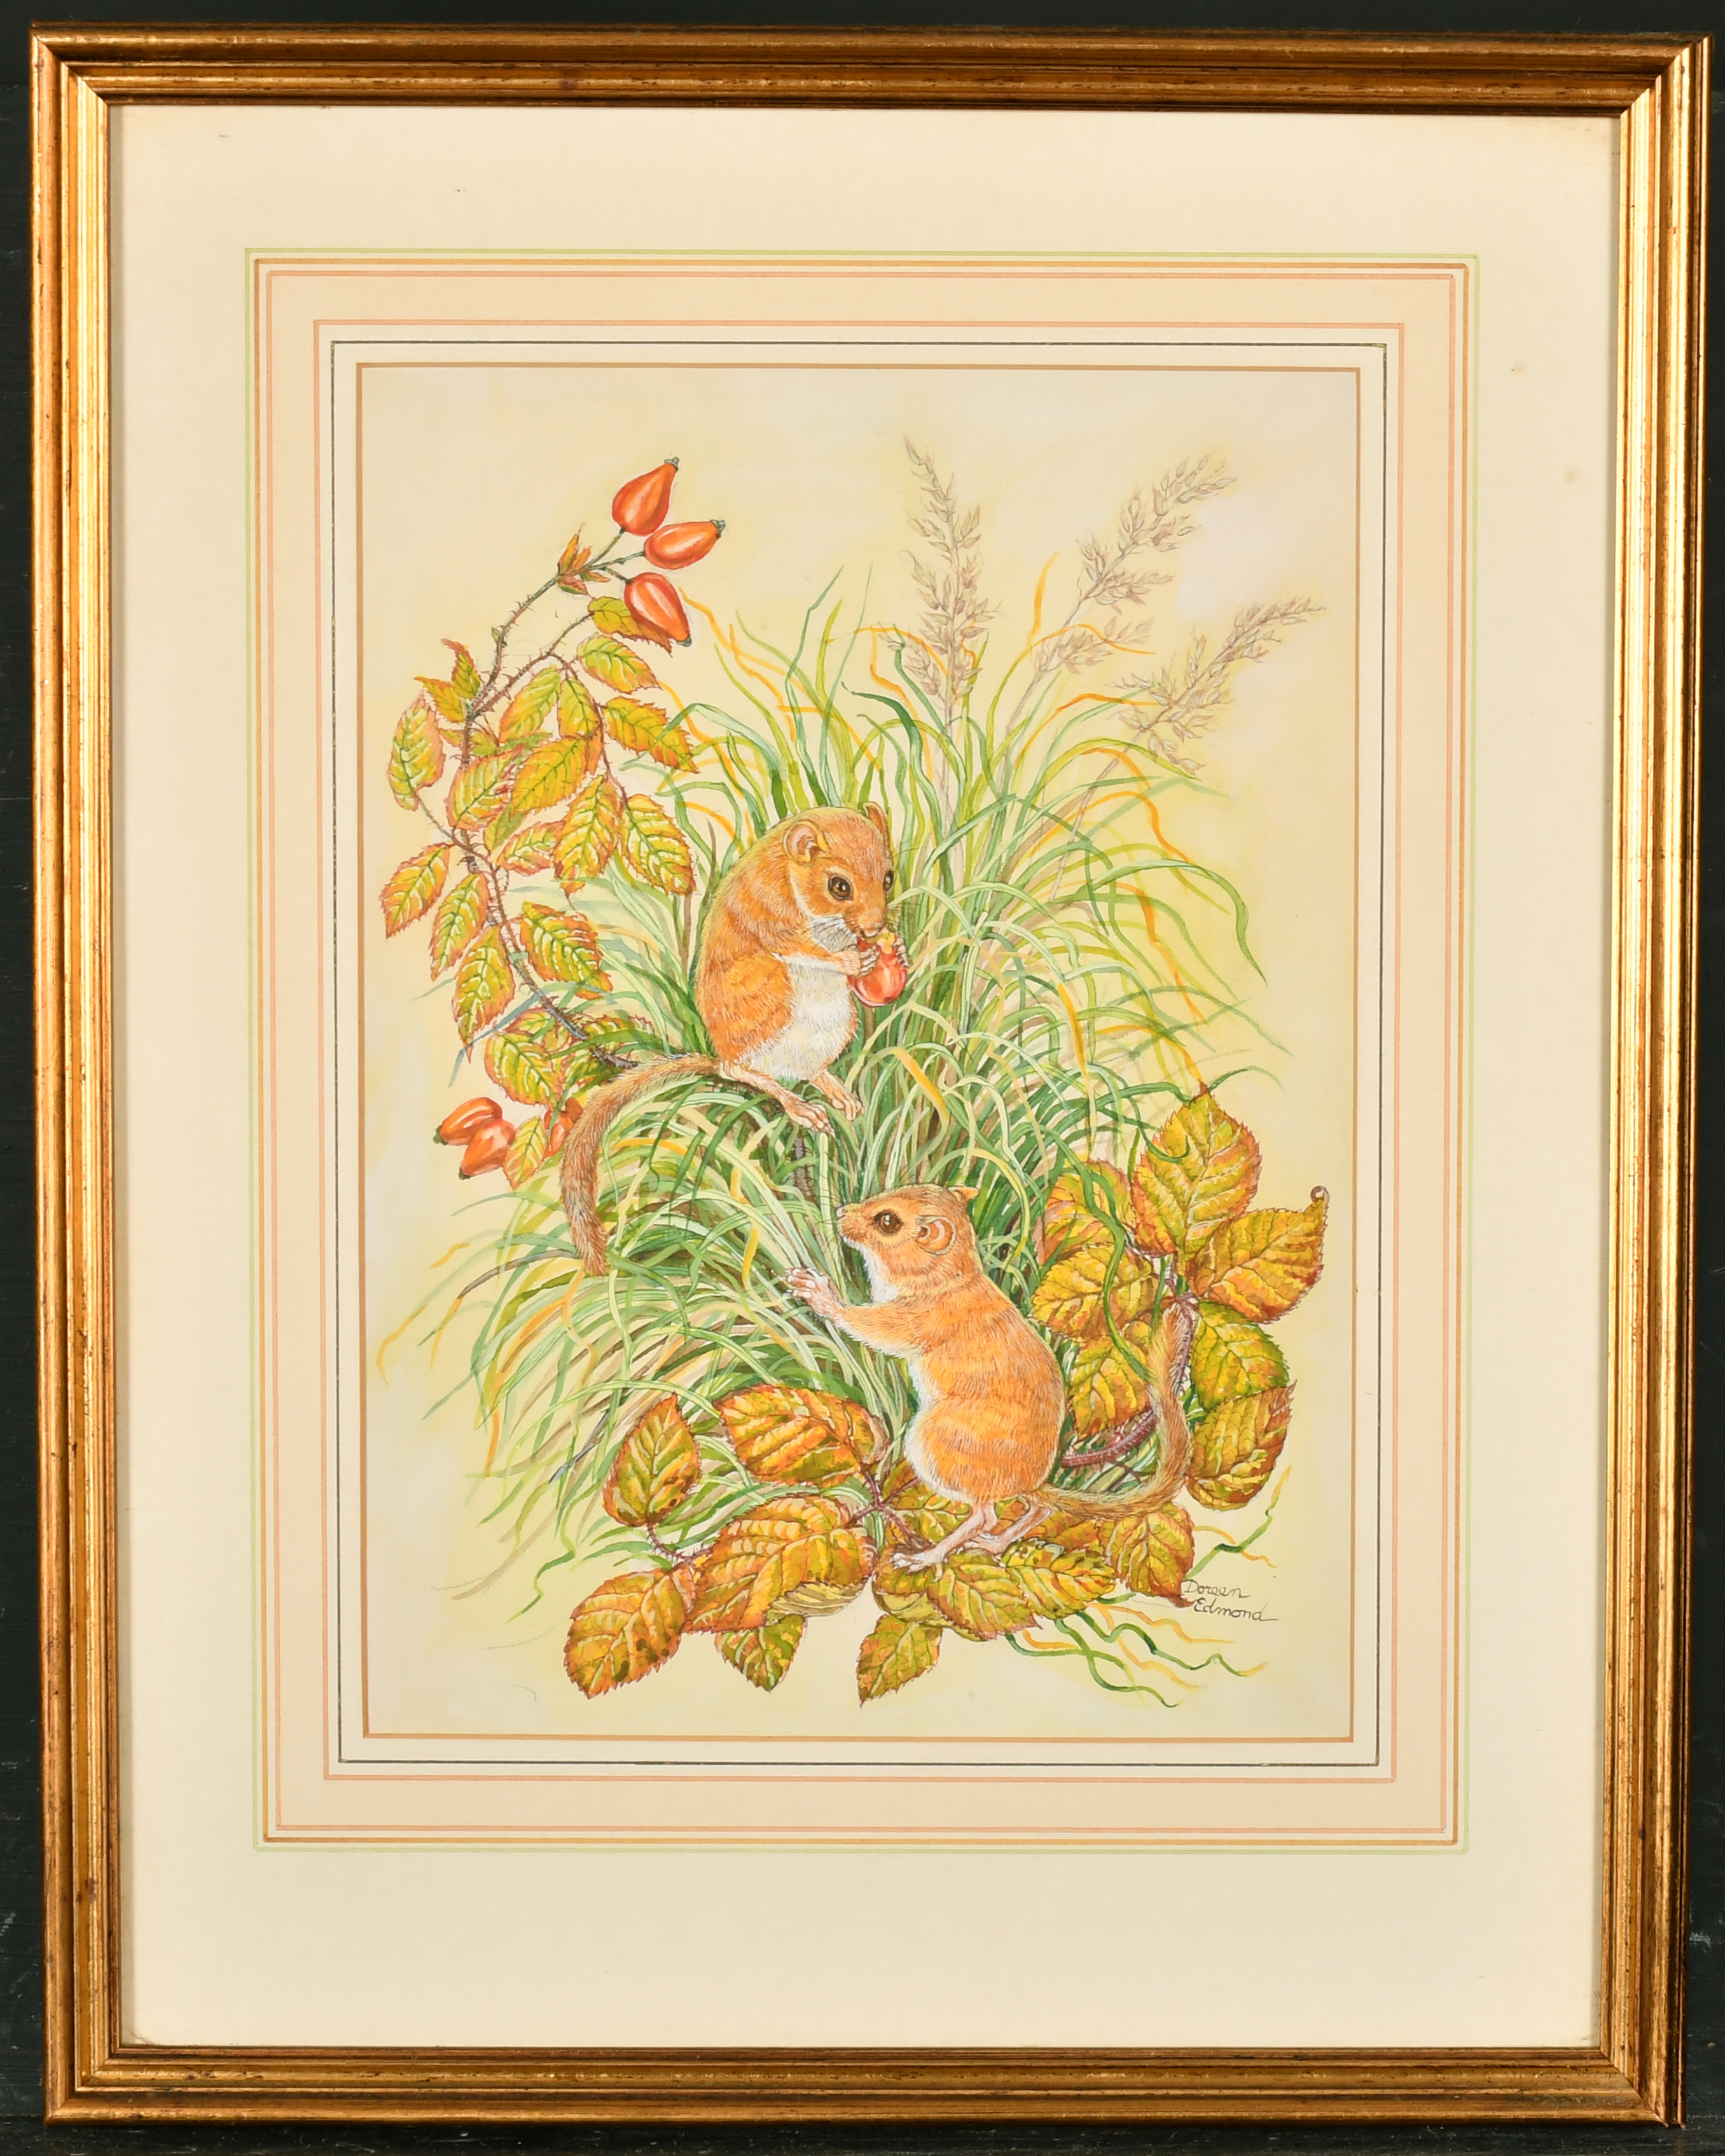 Doreen Edmond (20th Century) British. Mice in the Undergrowth, Watercolour, Signed, 12.75" x 9. - Image 3 of 6